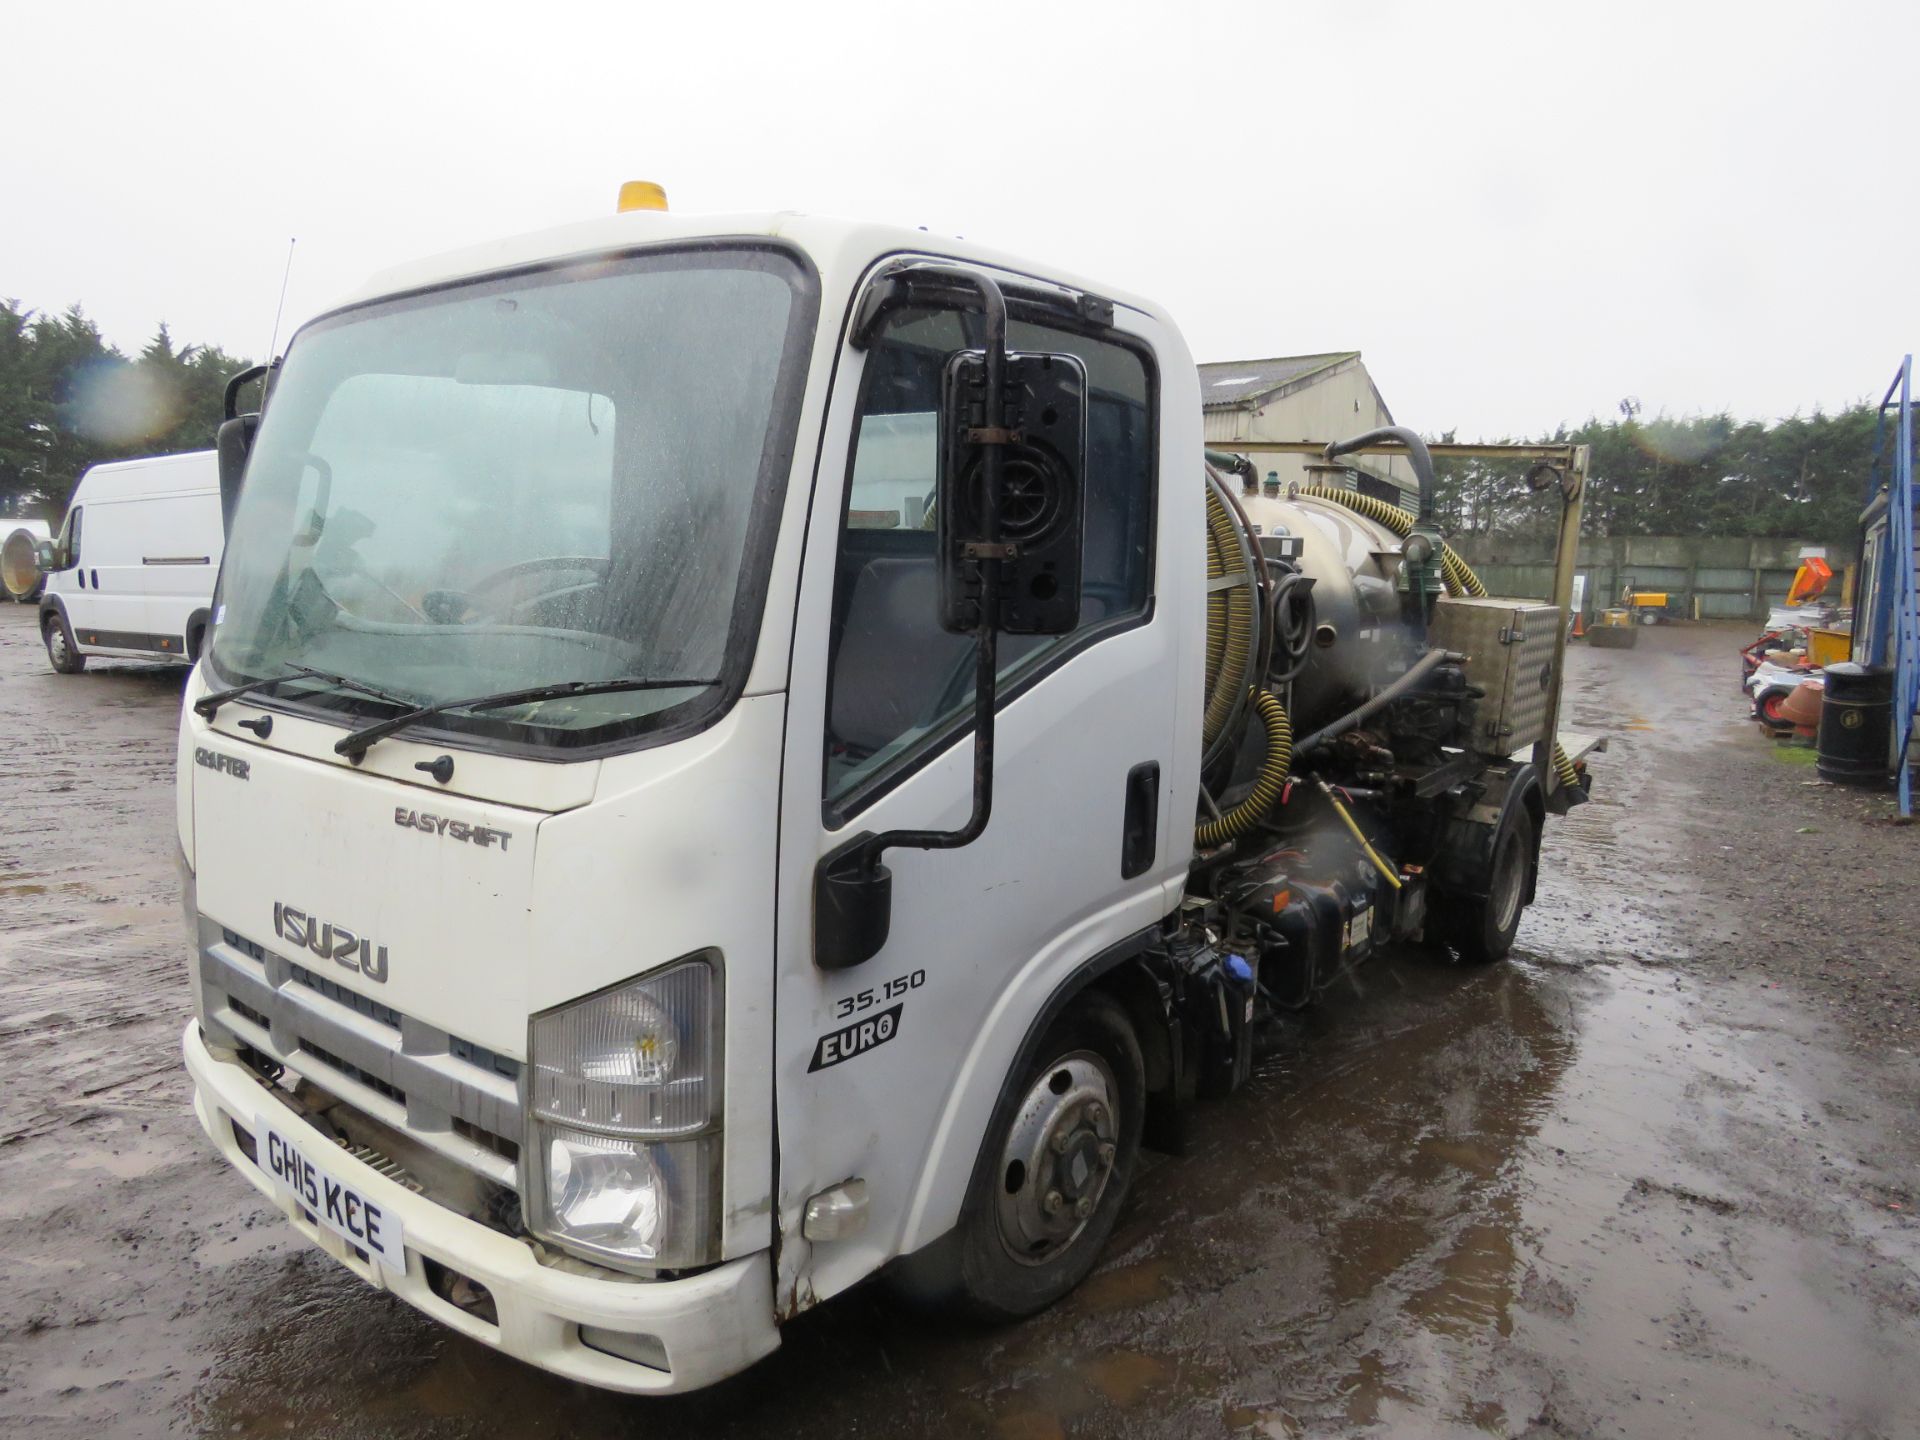 ISUZU N35.150 PORTABLE TOILET SERVICE VEHICLE TANKER TRUCK REG:GH15 KCE. 3500KG RATED CAPACITY. WITH - Image 3 of 10